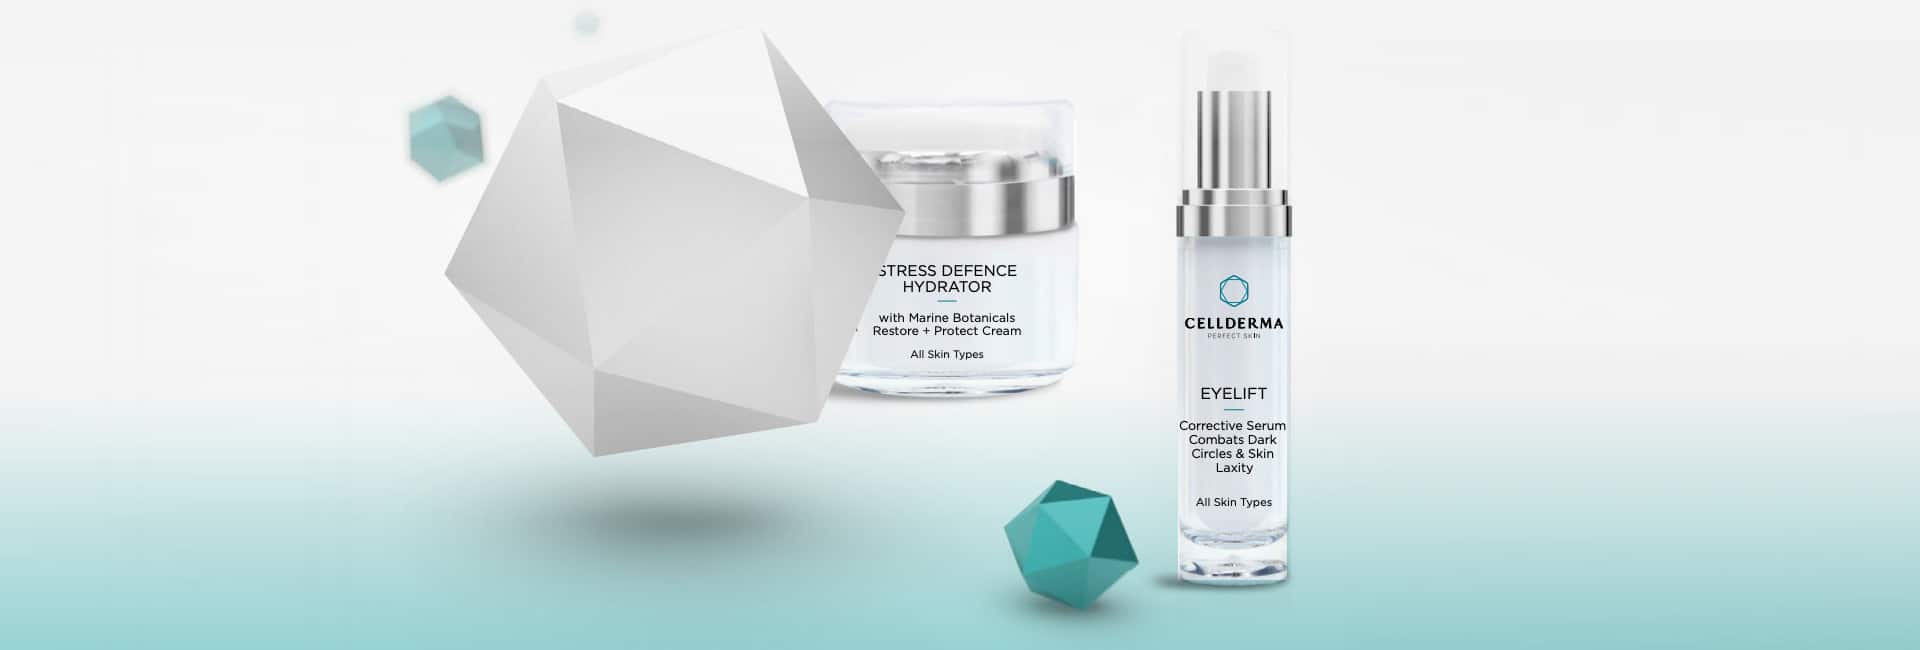 An Introduction to CellDerma’s Range